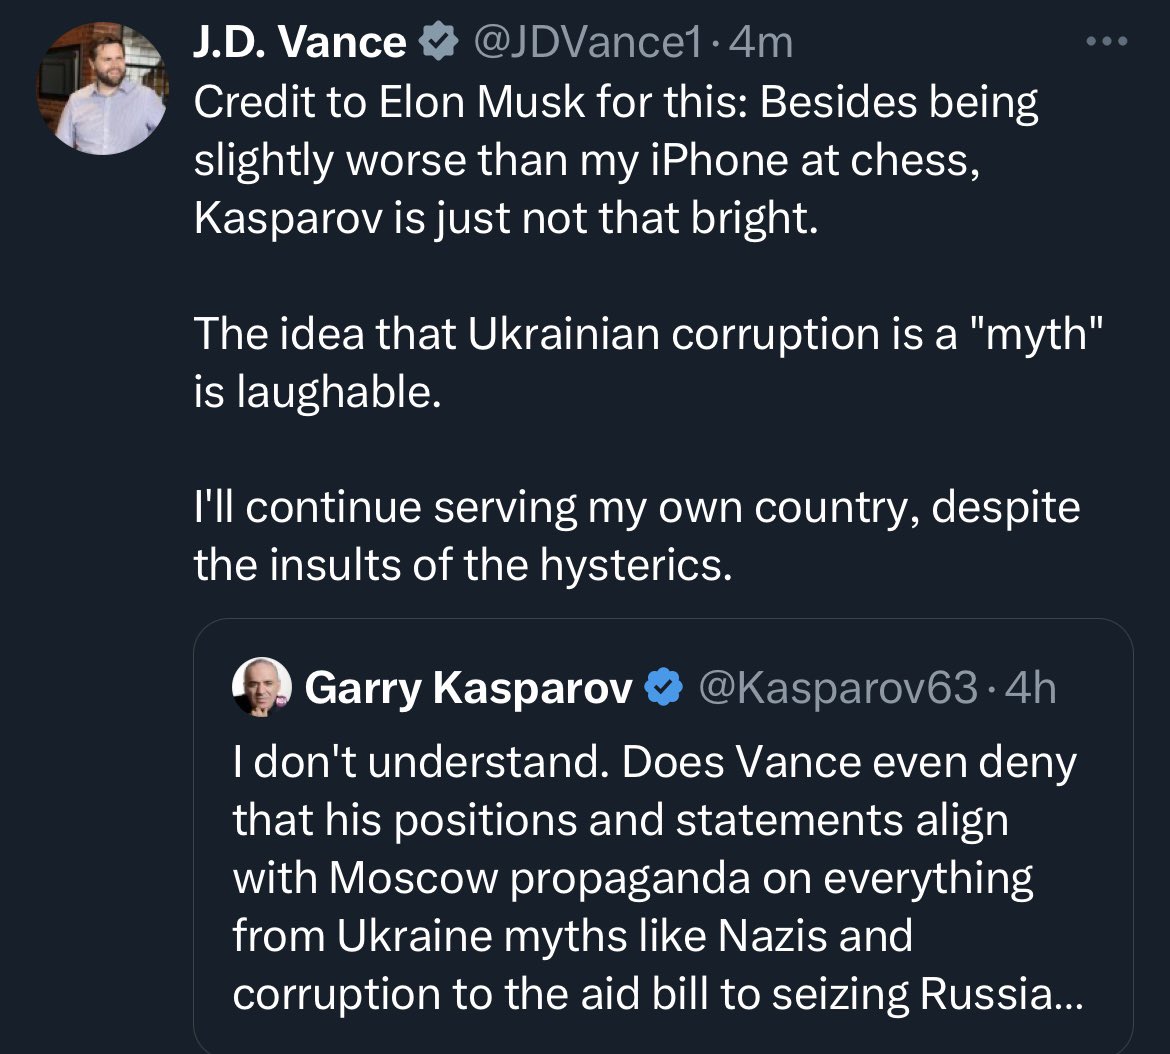 Yes, the World Chess Champion for 15 consecutive years and #1 player in the world for a record 255 months sucks at chess, isn’t that bright, and JD isn’t a Putin Puppet. Got it.